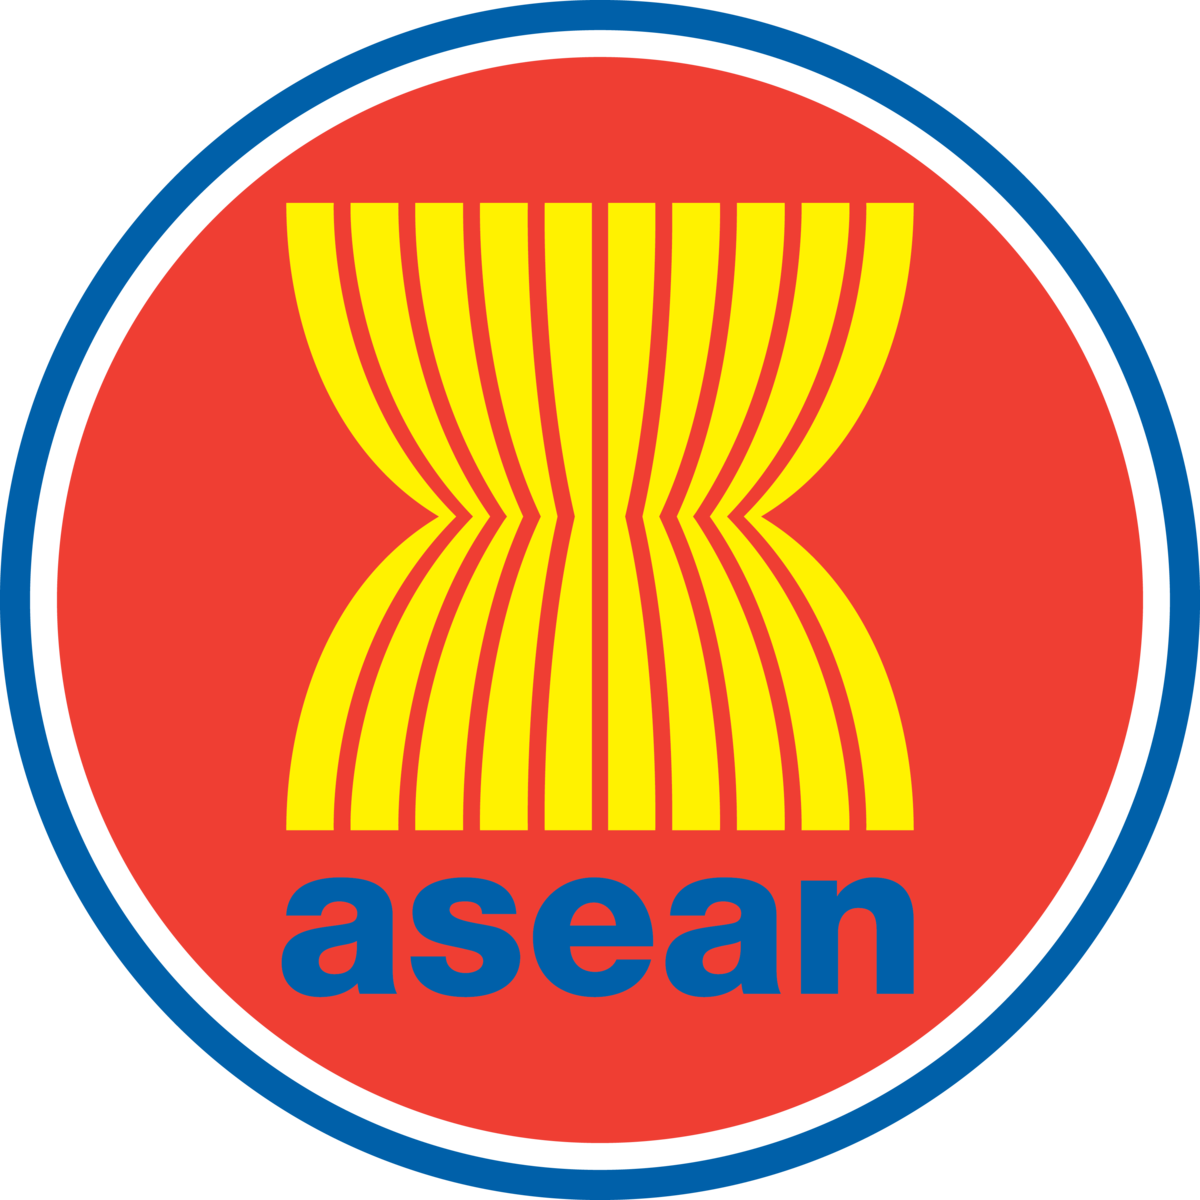 https://upload.wikimedia.org/wikipedia/commons/thumb/5/59/ASEAN_Embleme.png/1200px-ASEAN_Embleme.png